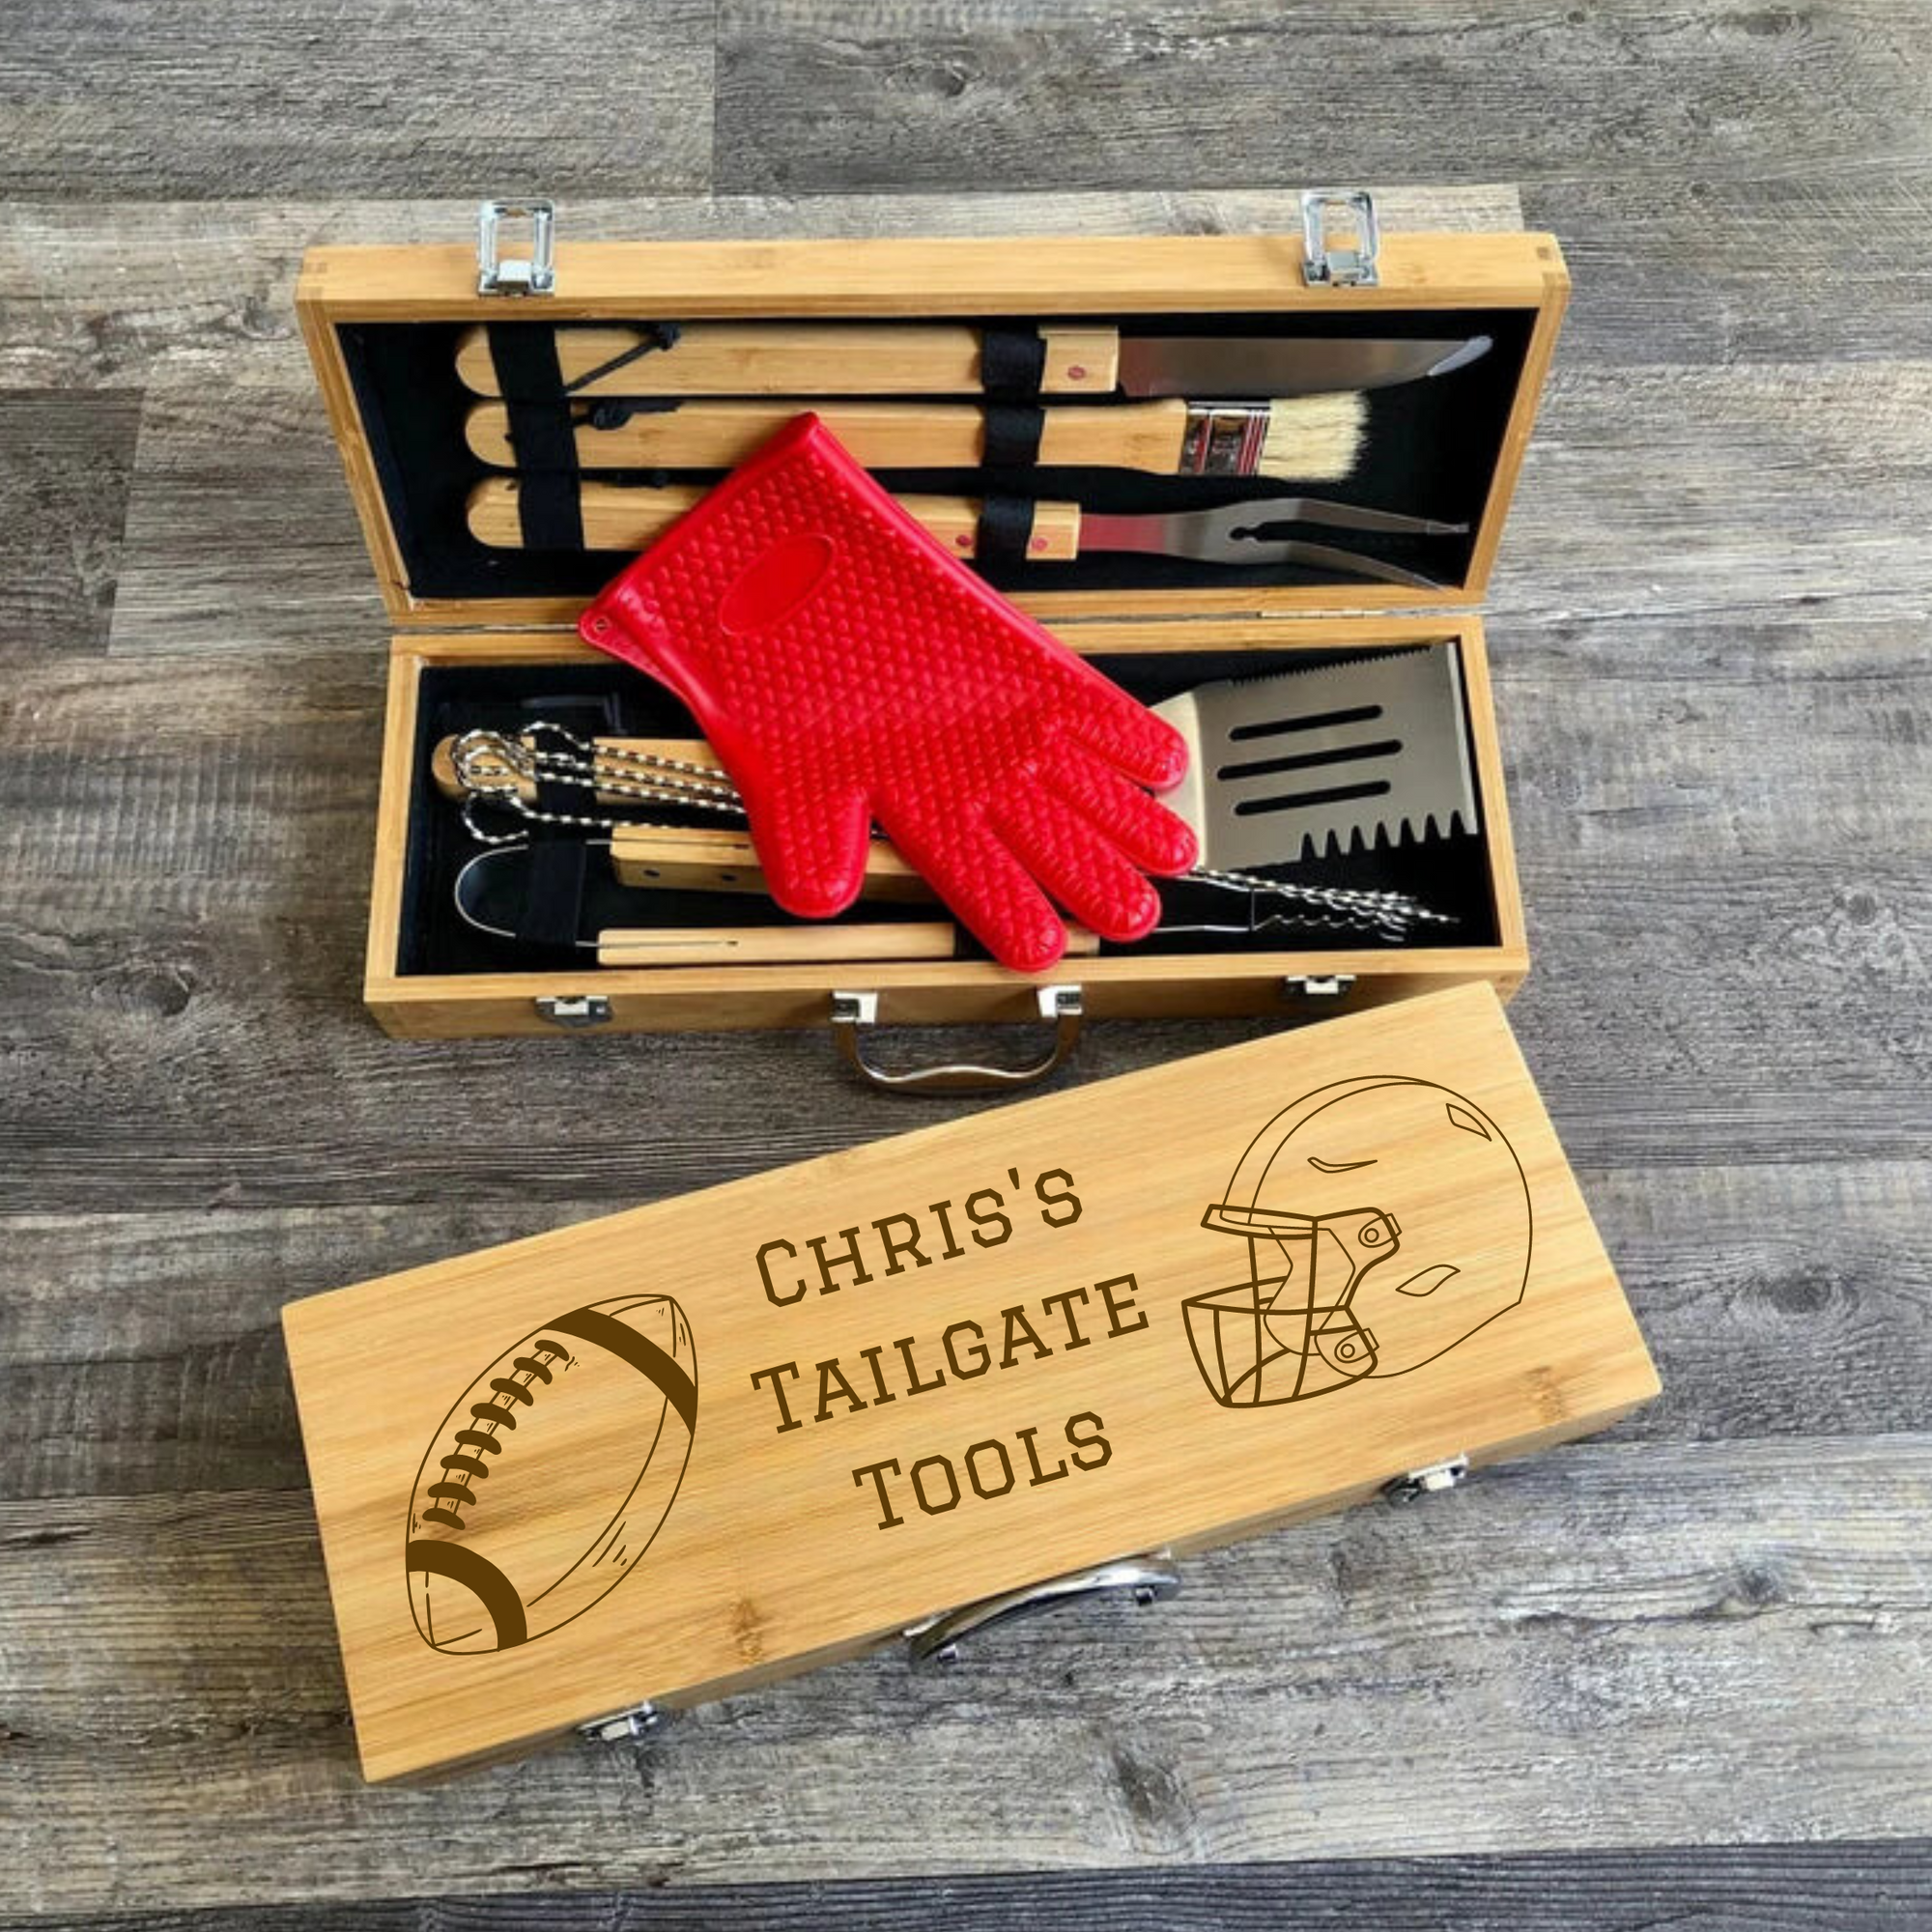 Grill Gift Set, BBQ Grilling Tools, Personalized BBQ Set, Barbecue Gift,  Engrave Grill Tool, Grill Case, Man Grill Gift Idea, Gift for Grill 